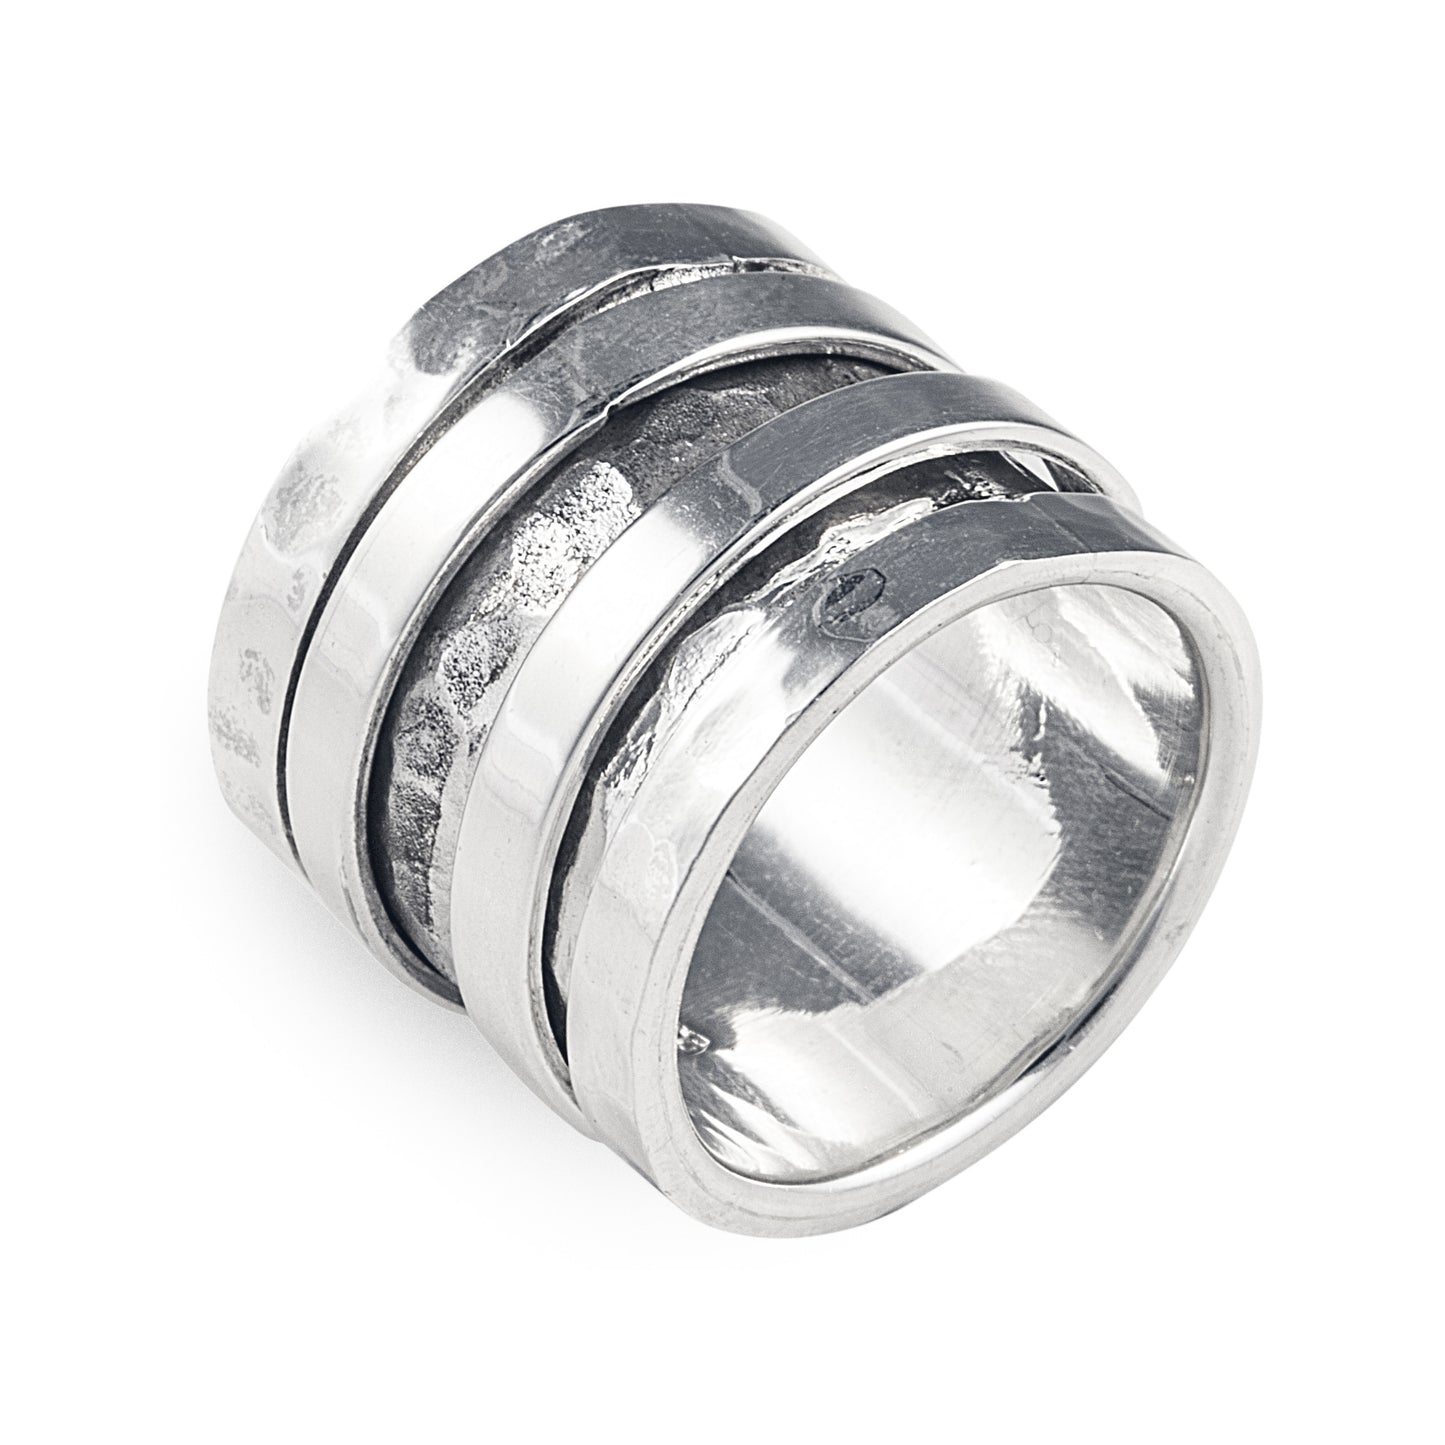 Silver Spin Ring in 925 Sterling Silver. Worldwide Shipping. Affordable luxury jewellery by Bellagio & Co.